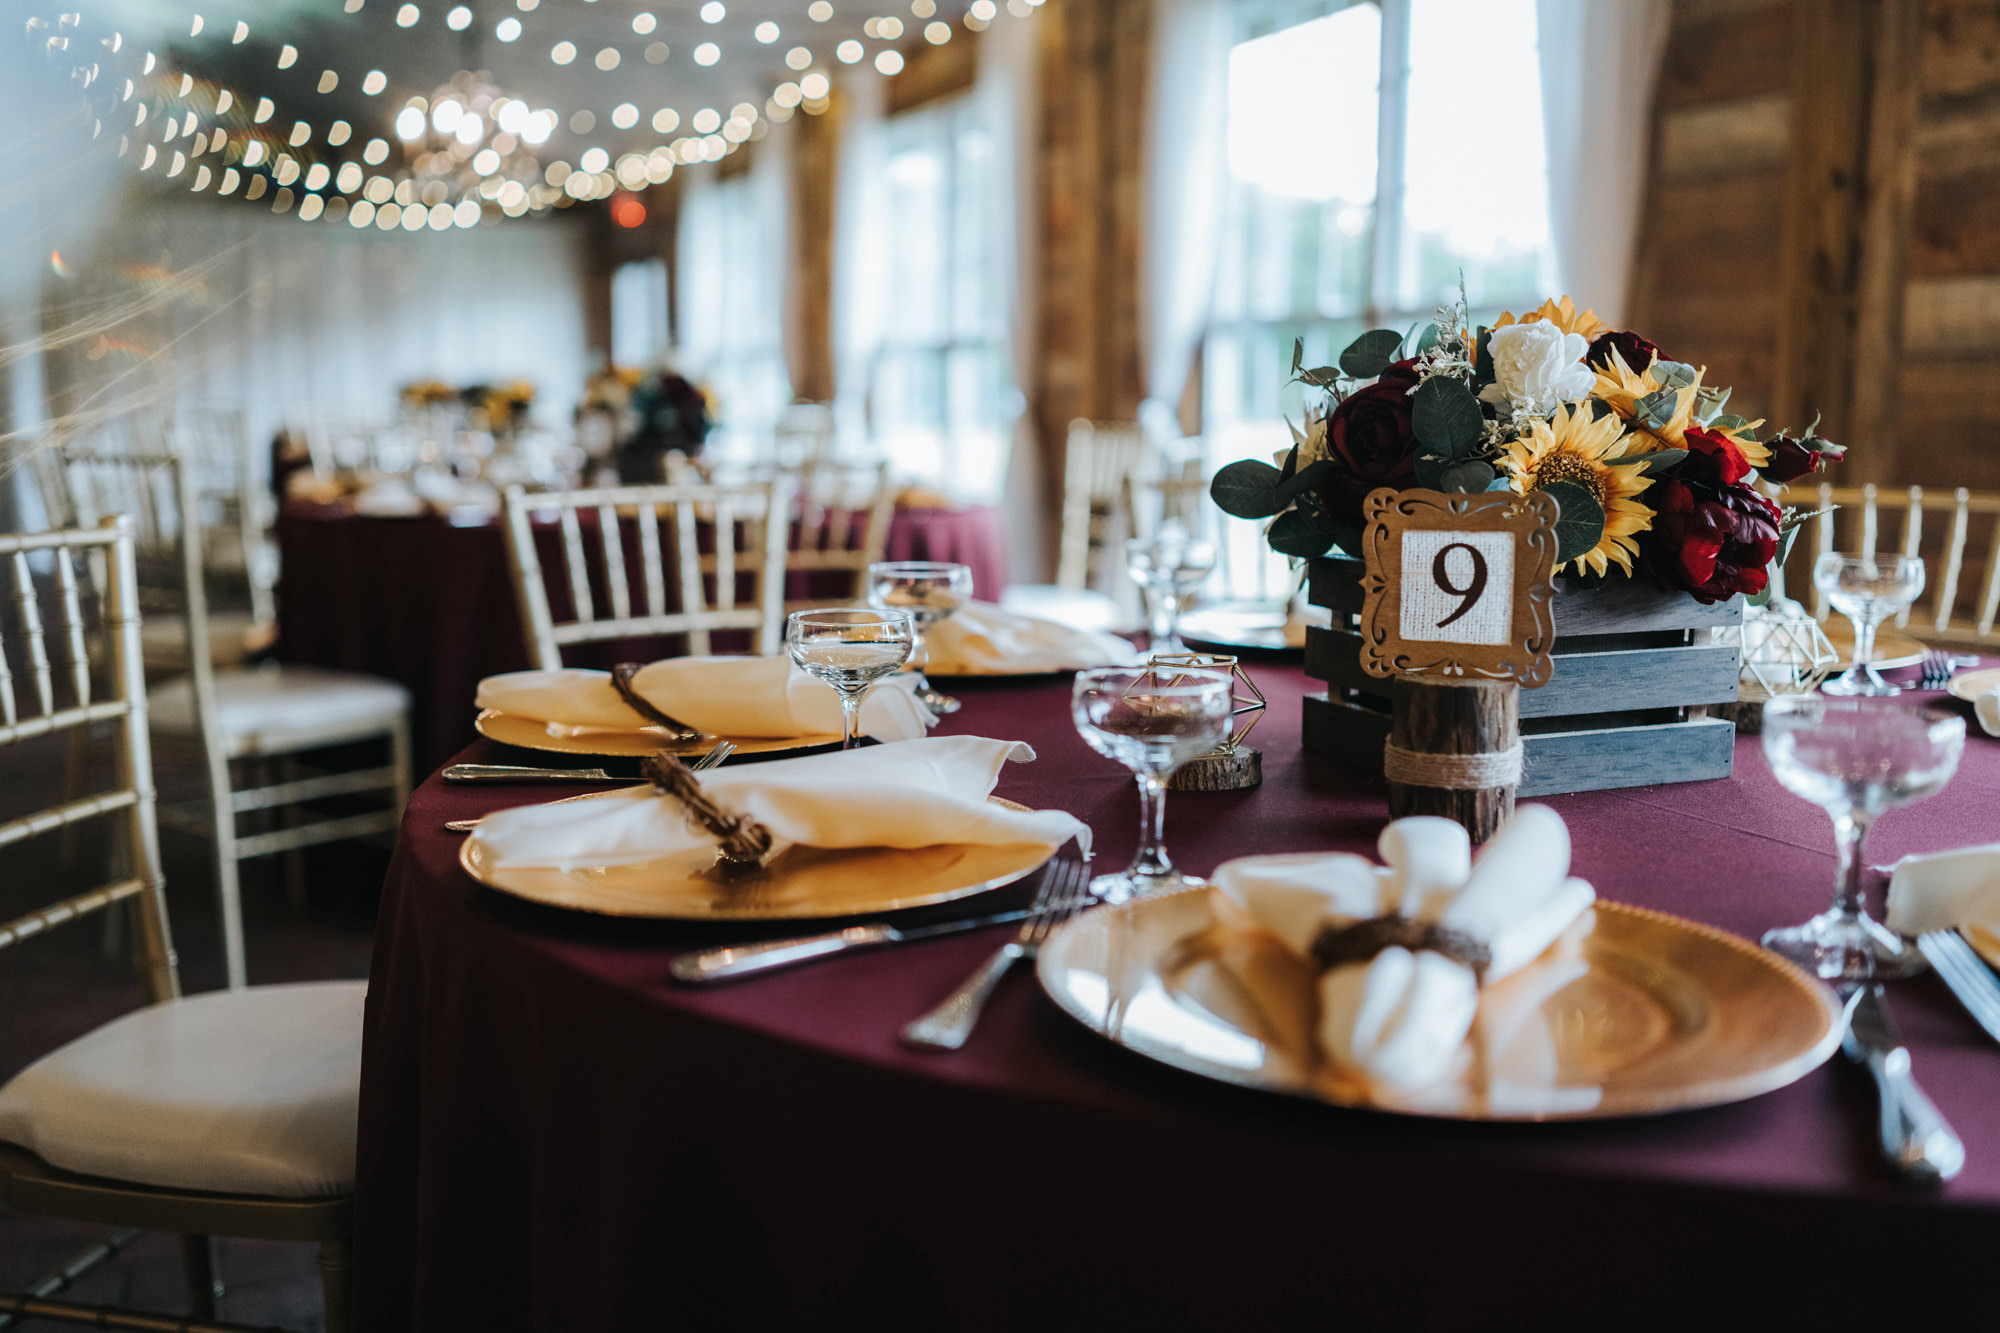 Rustic Dover Burgundy and Yellow Sunflower Wedding Barn Reception with String Lights and Ceiling Draping | Round Reception Tables with Burgundy Maroon Red Linen Table Cloths and Gold Chiavari Chairs | Wood Crate Centerpiece with Red Roses and Yellow Sunflowers with Gold Charger Plates and Wood Frame Table Numbers